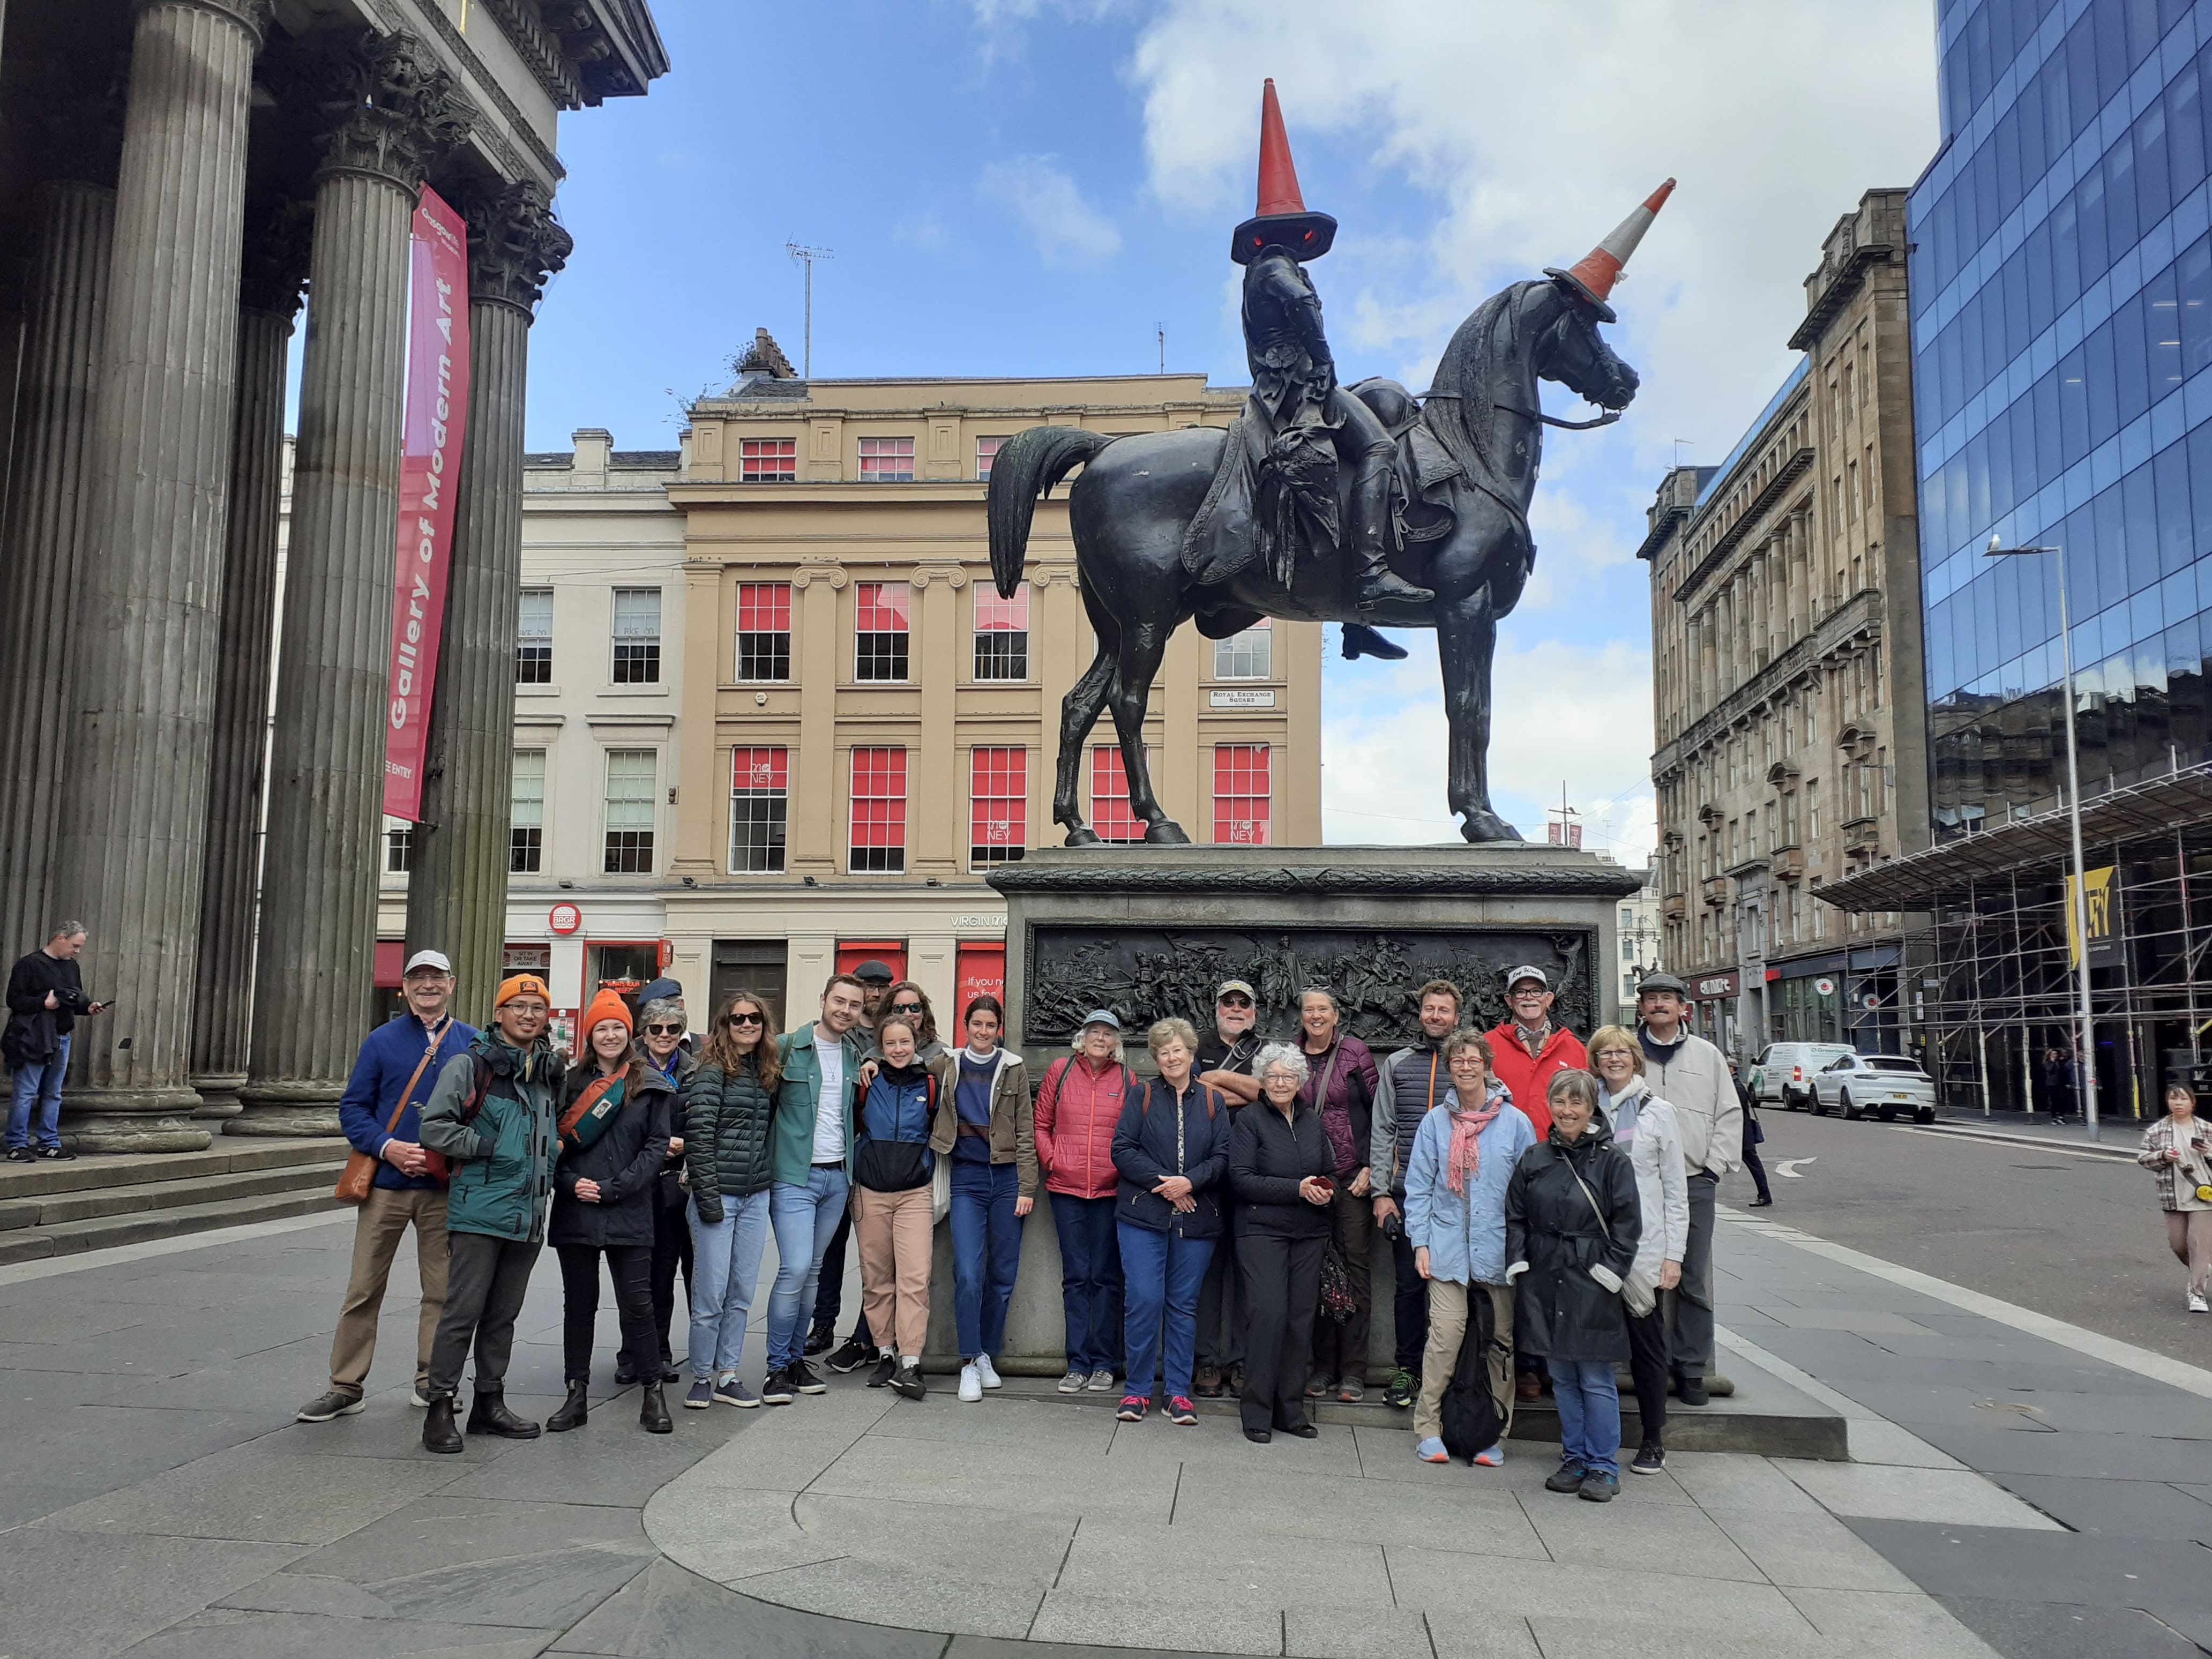 Scottish walking tour business expands across UK with support from Business Gateway